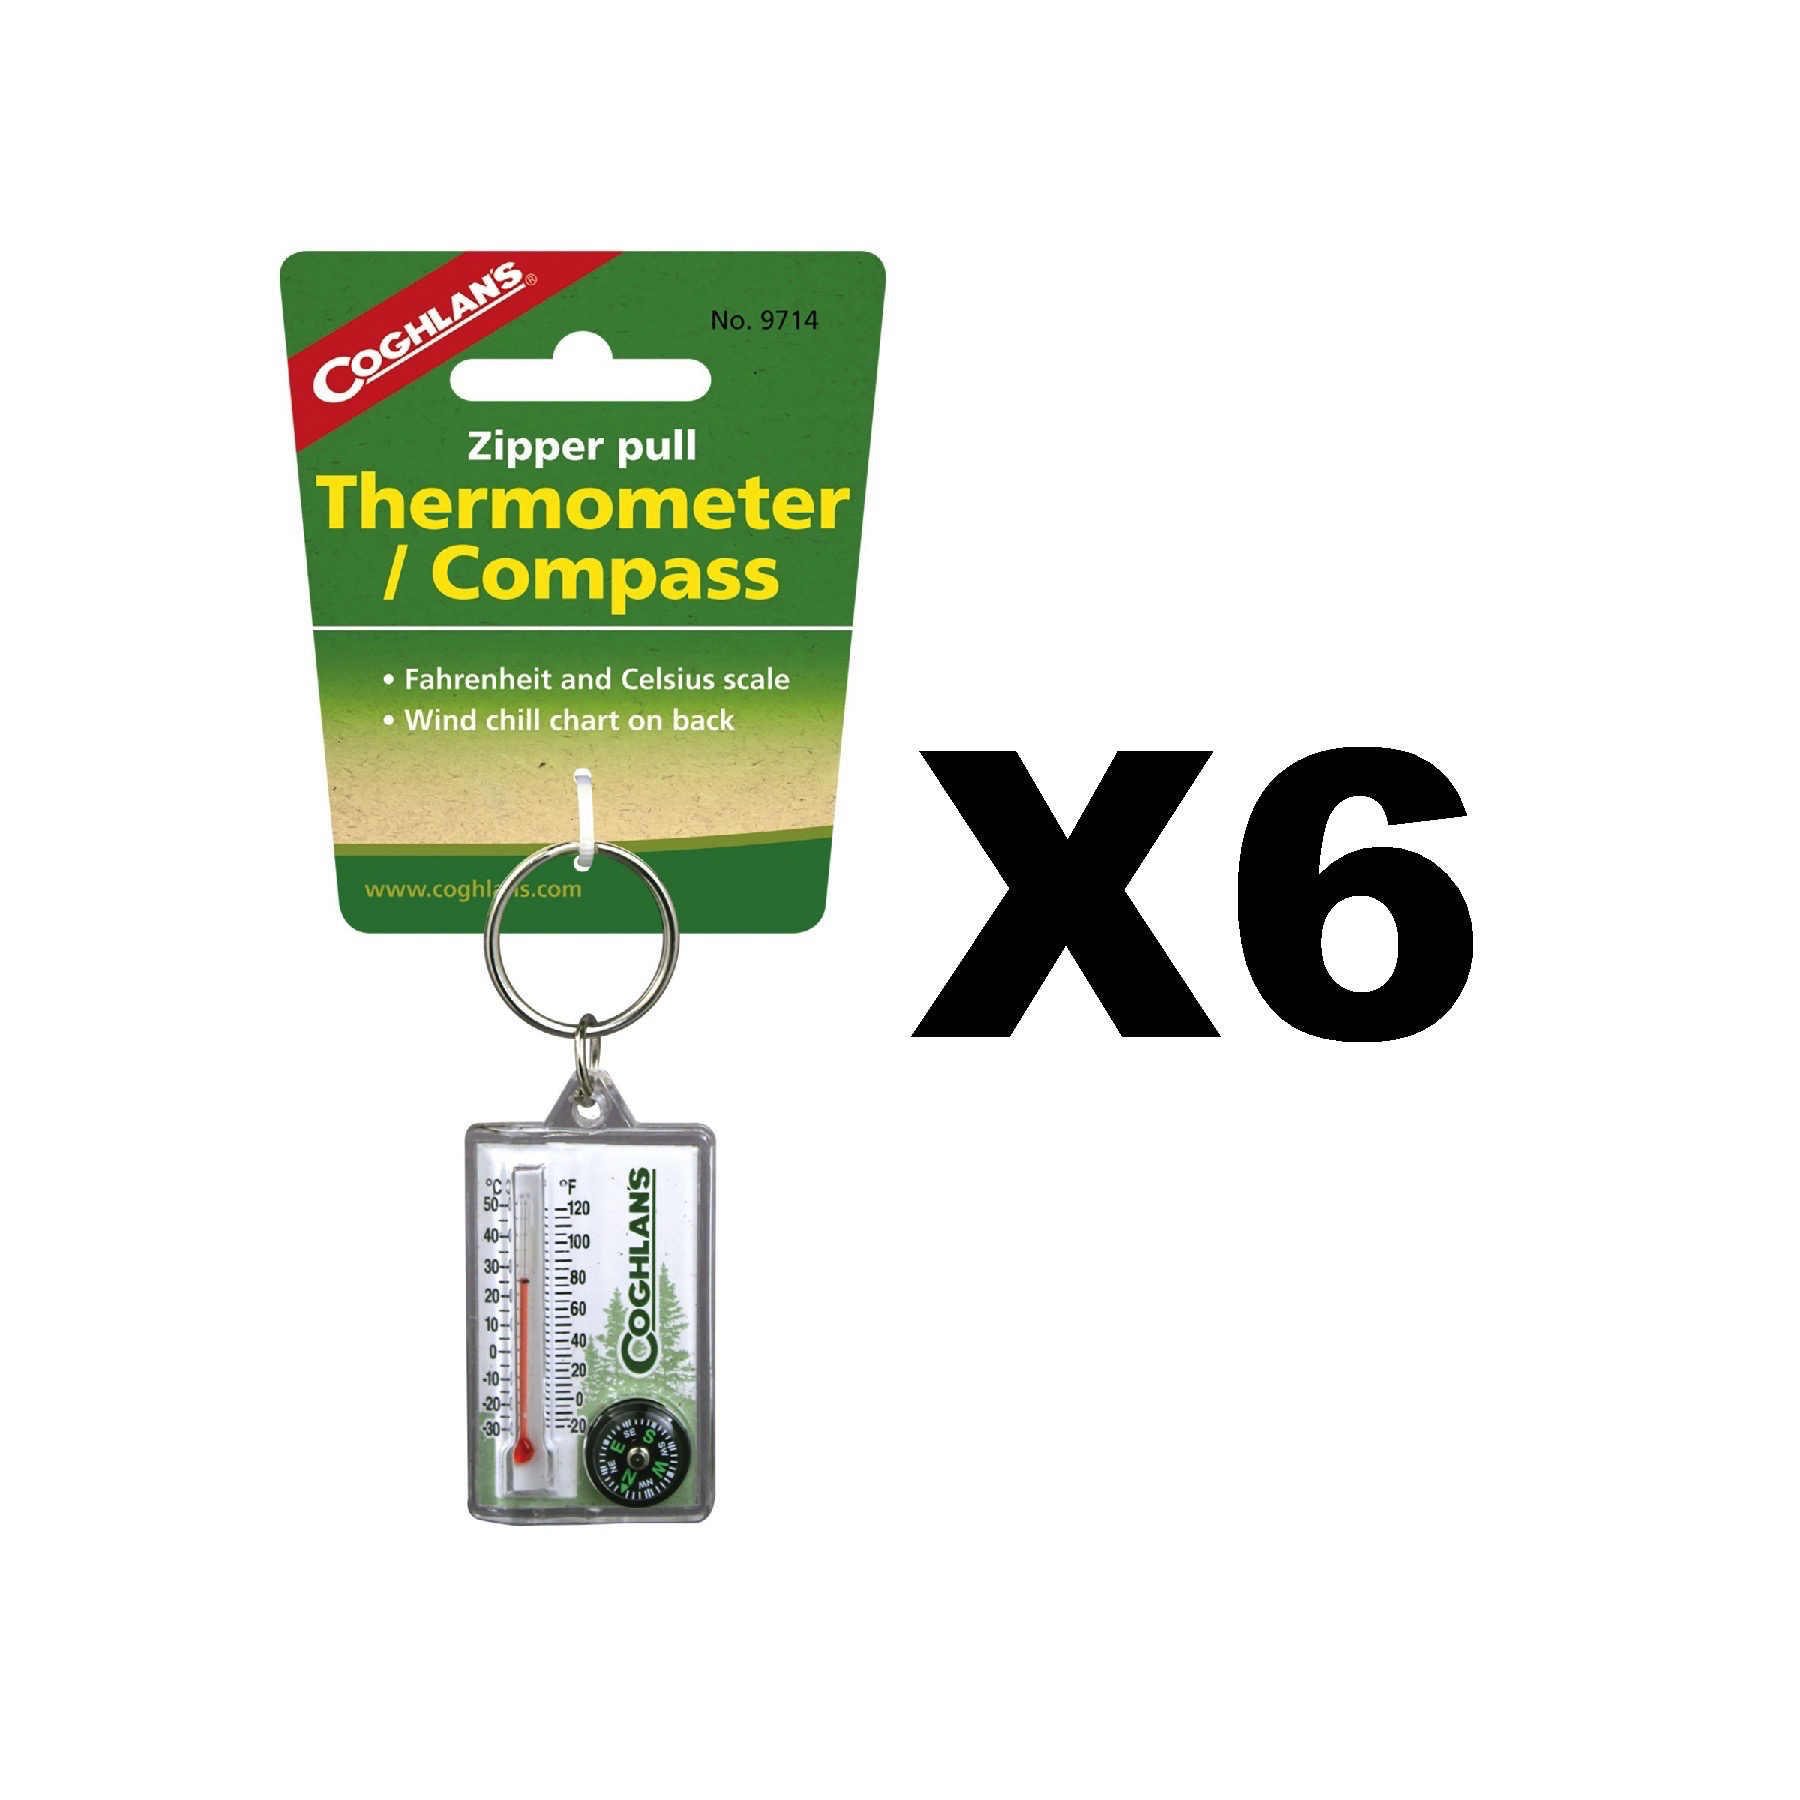 Coghlans Zipper Pull Thermometer with Compass